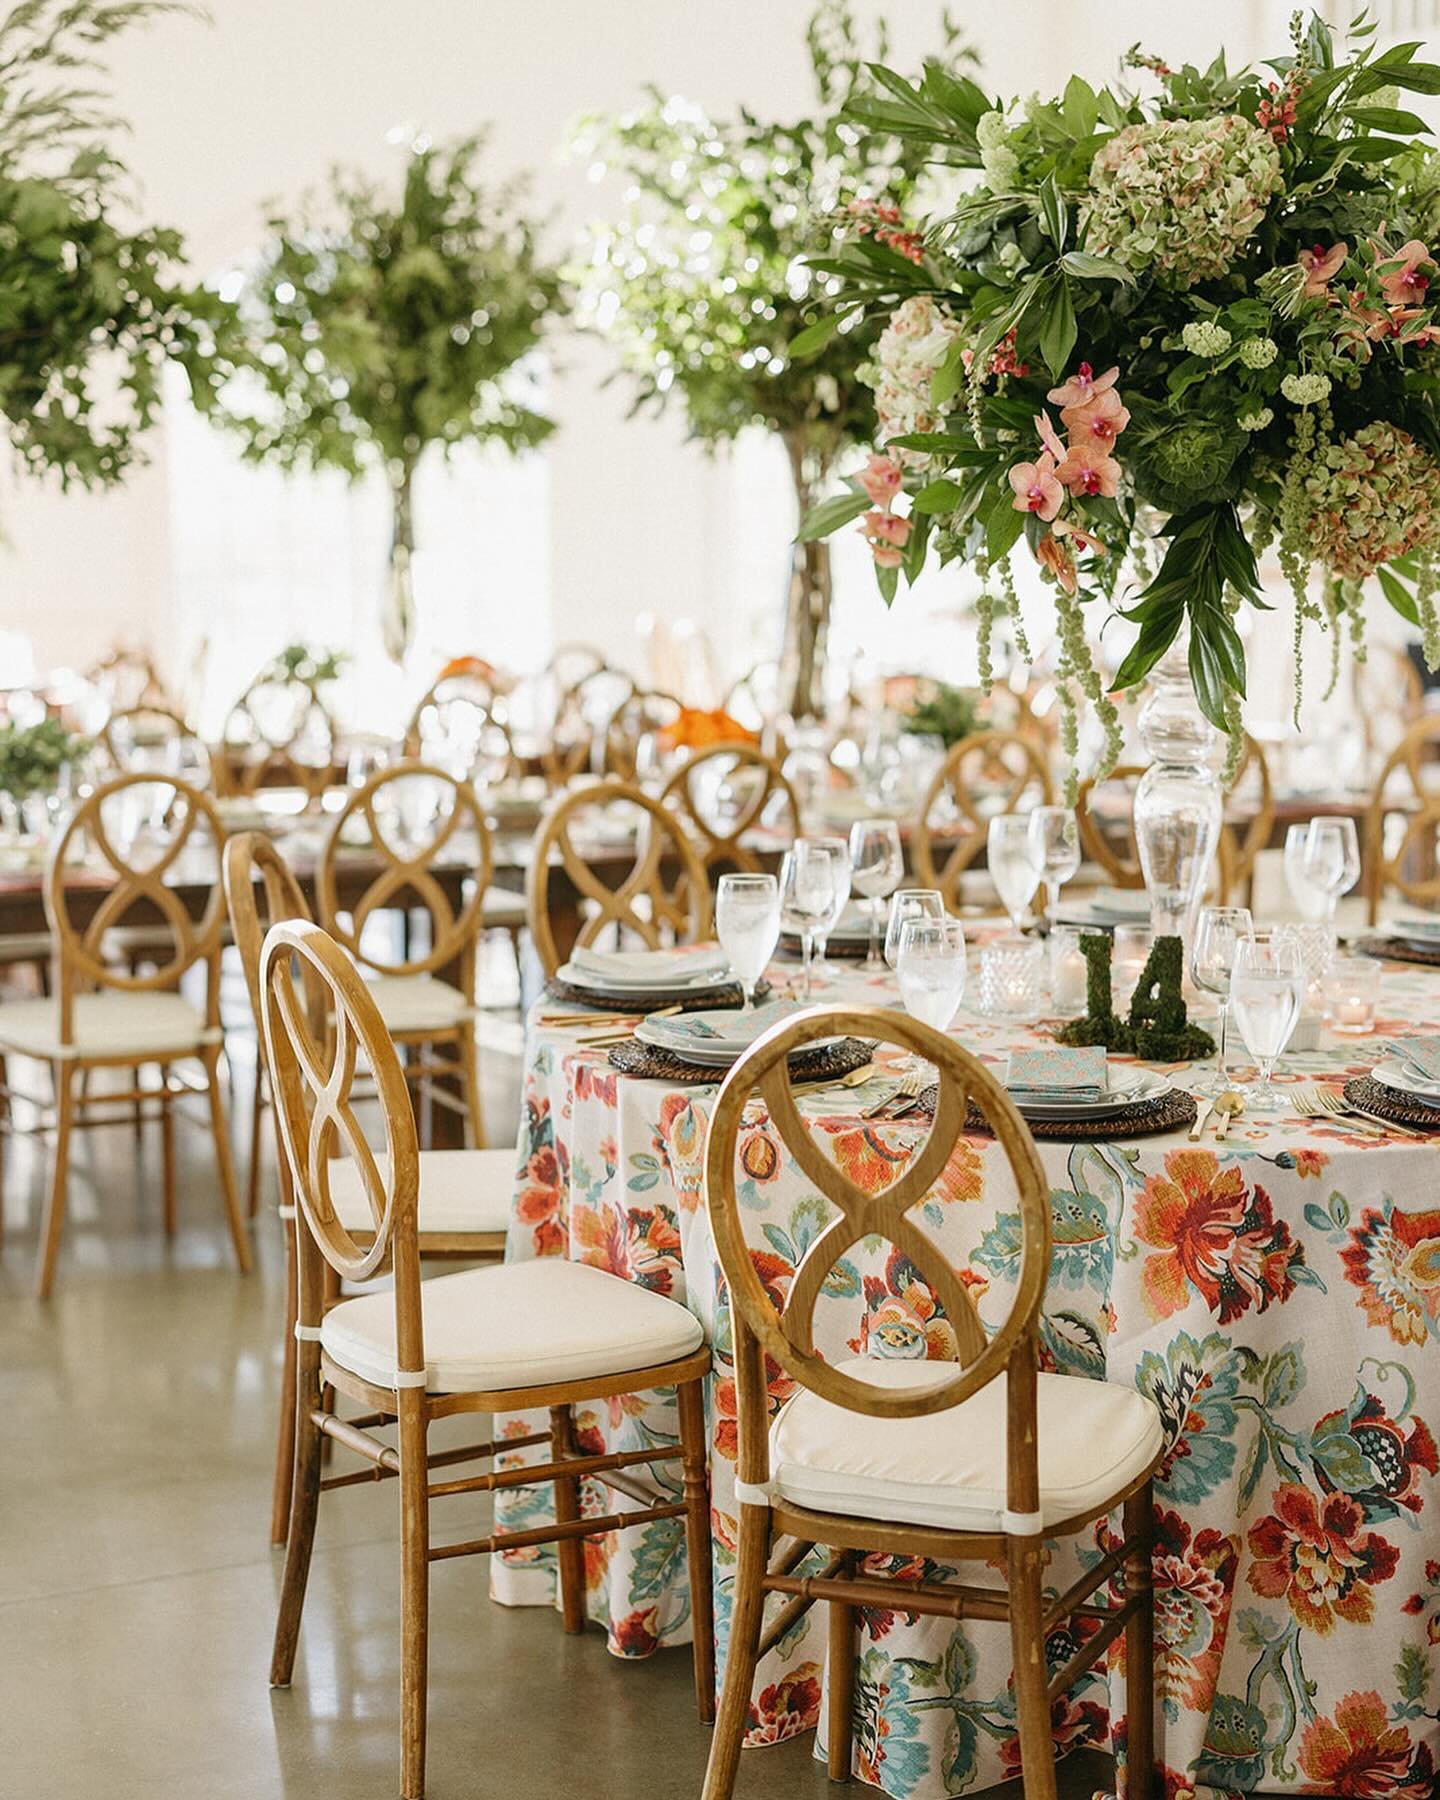 Swipe left to spot pops of Pantone&rsquo;s Color of the Year (Hint: It&rsquo;s Peach Fuzz! 🍑). 

Coordination: @ssdevents
Venue: @westwind_hills
Catering:  @grazecatering
Photo: @ashleypieperphotography
Video: @junsue
Hair + Makeup: @daniellestyle @